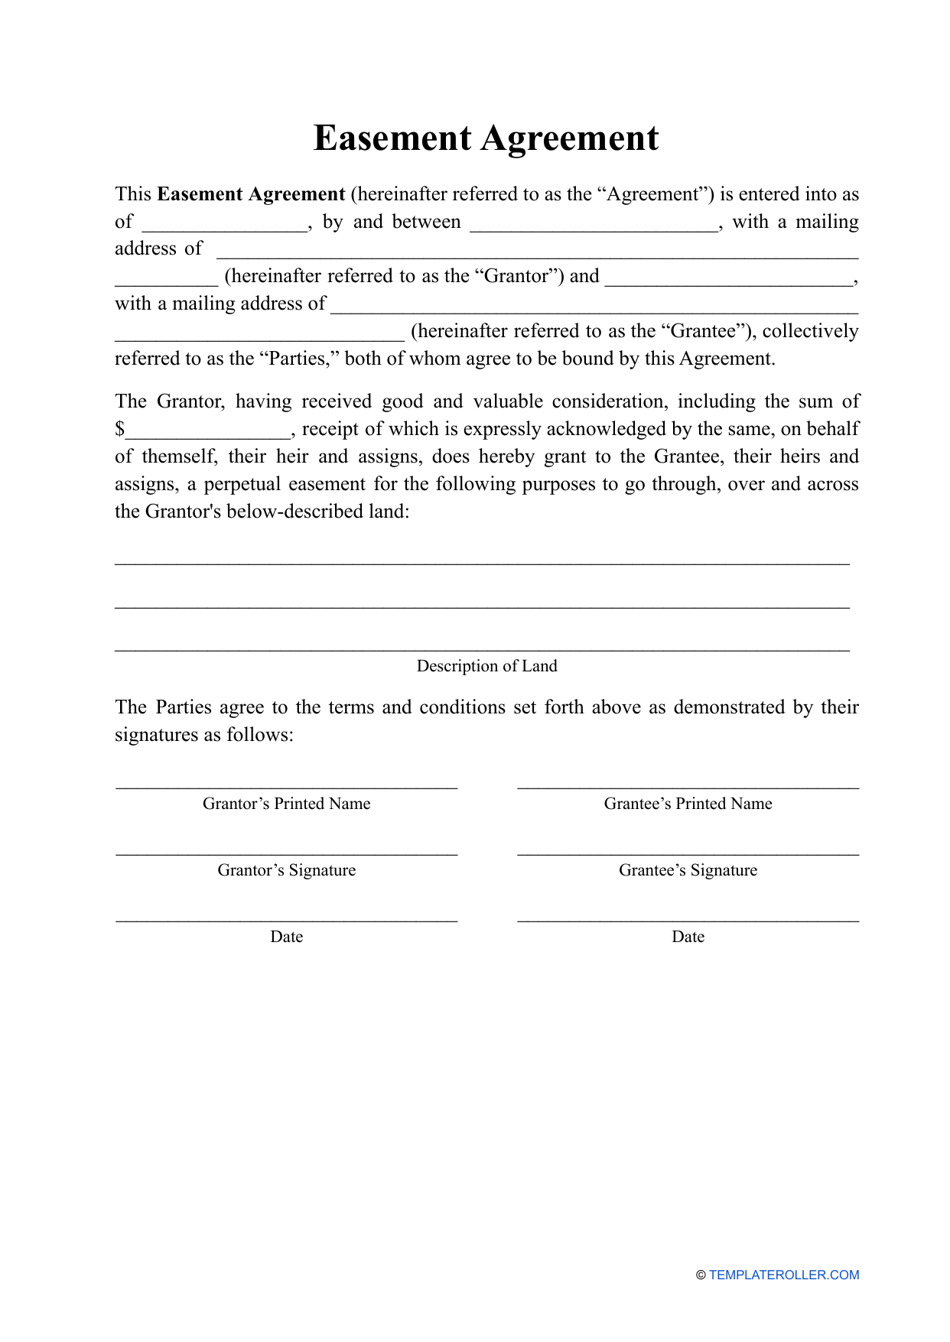 easement-agreement-template-fill-out-sign-online-and-download-pdf